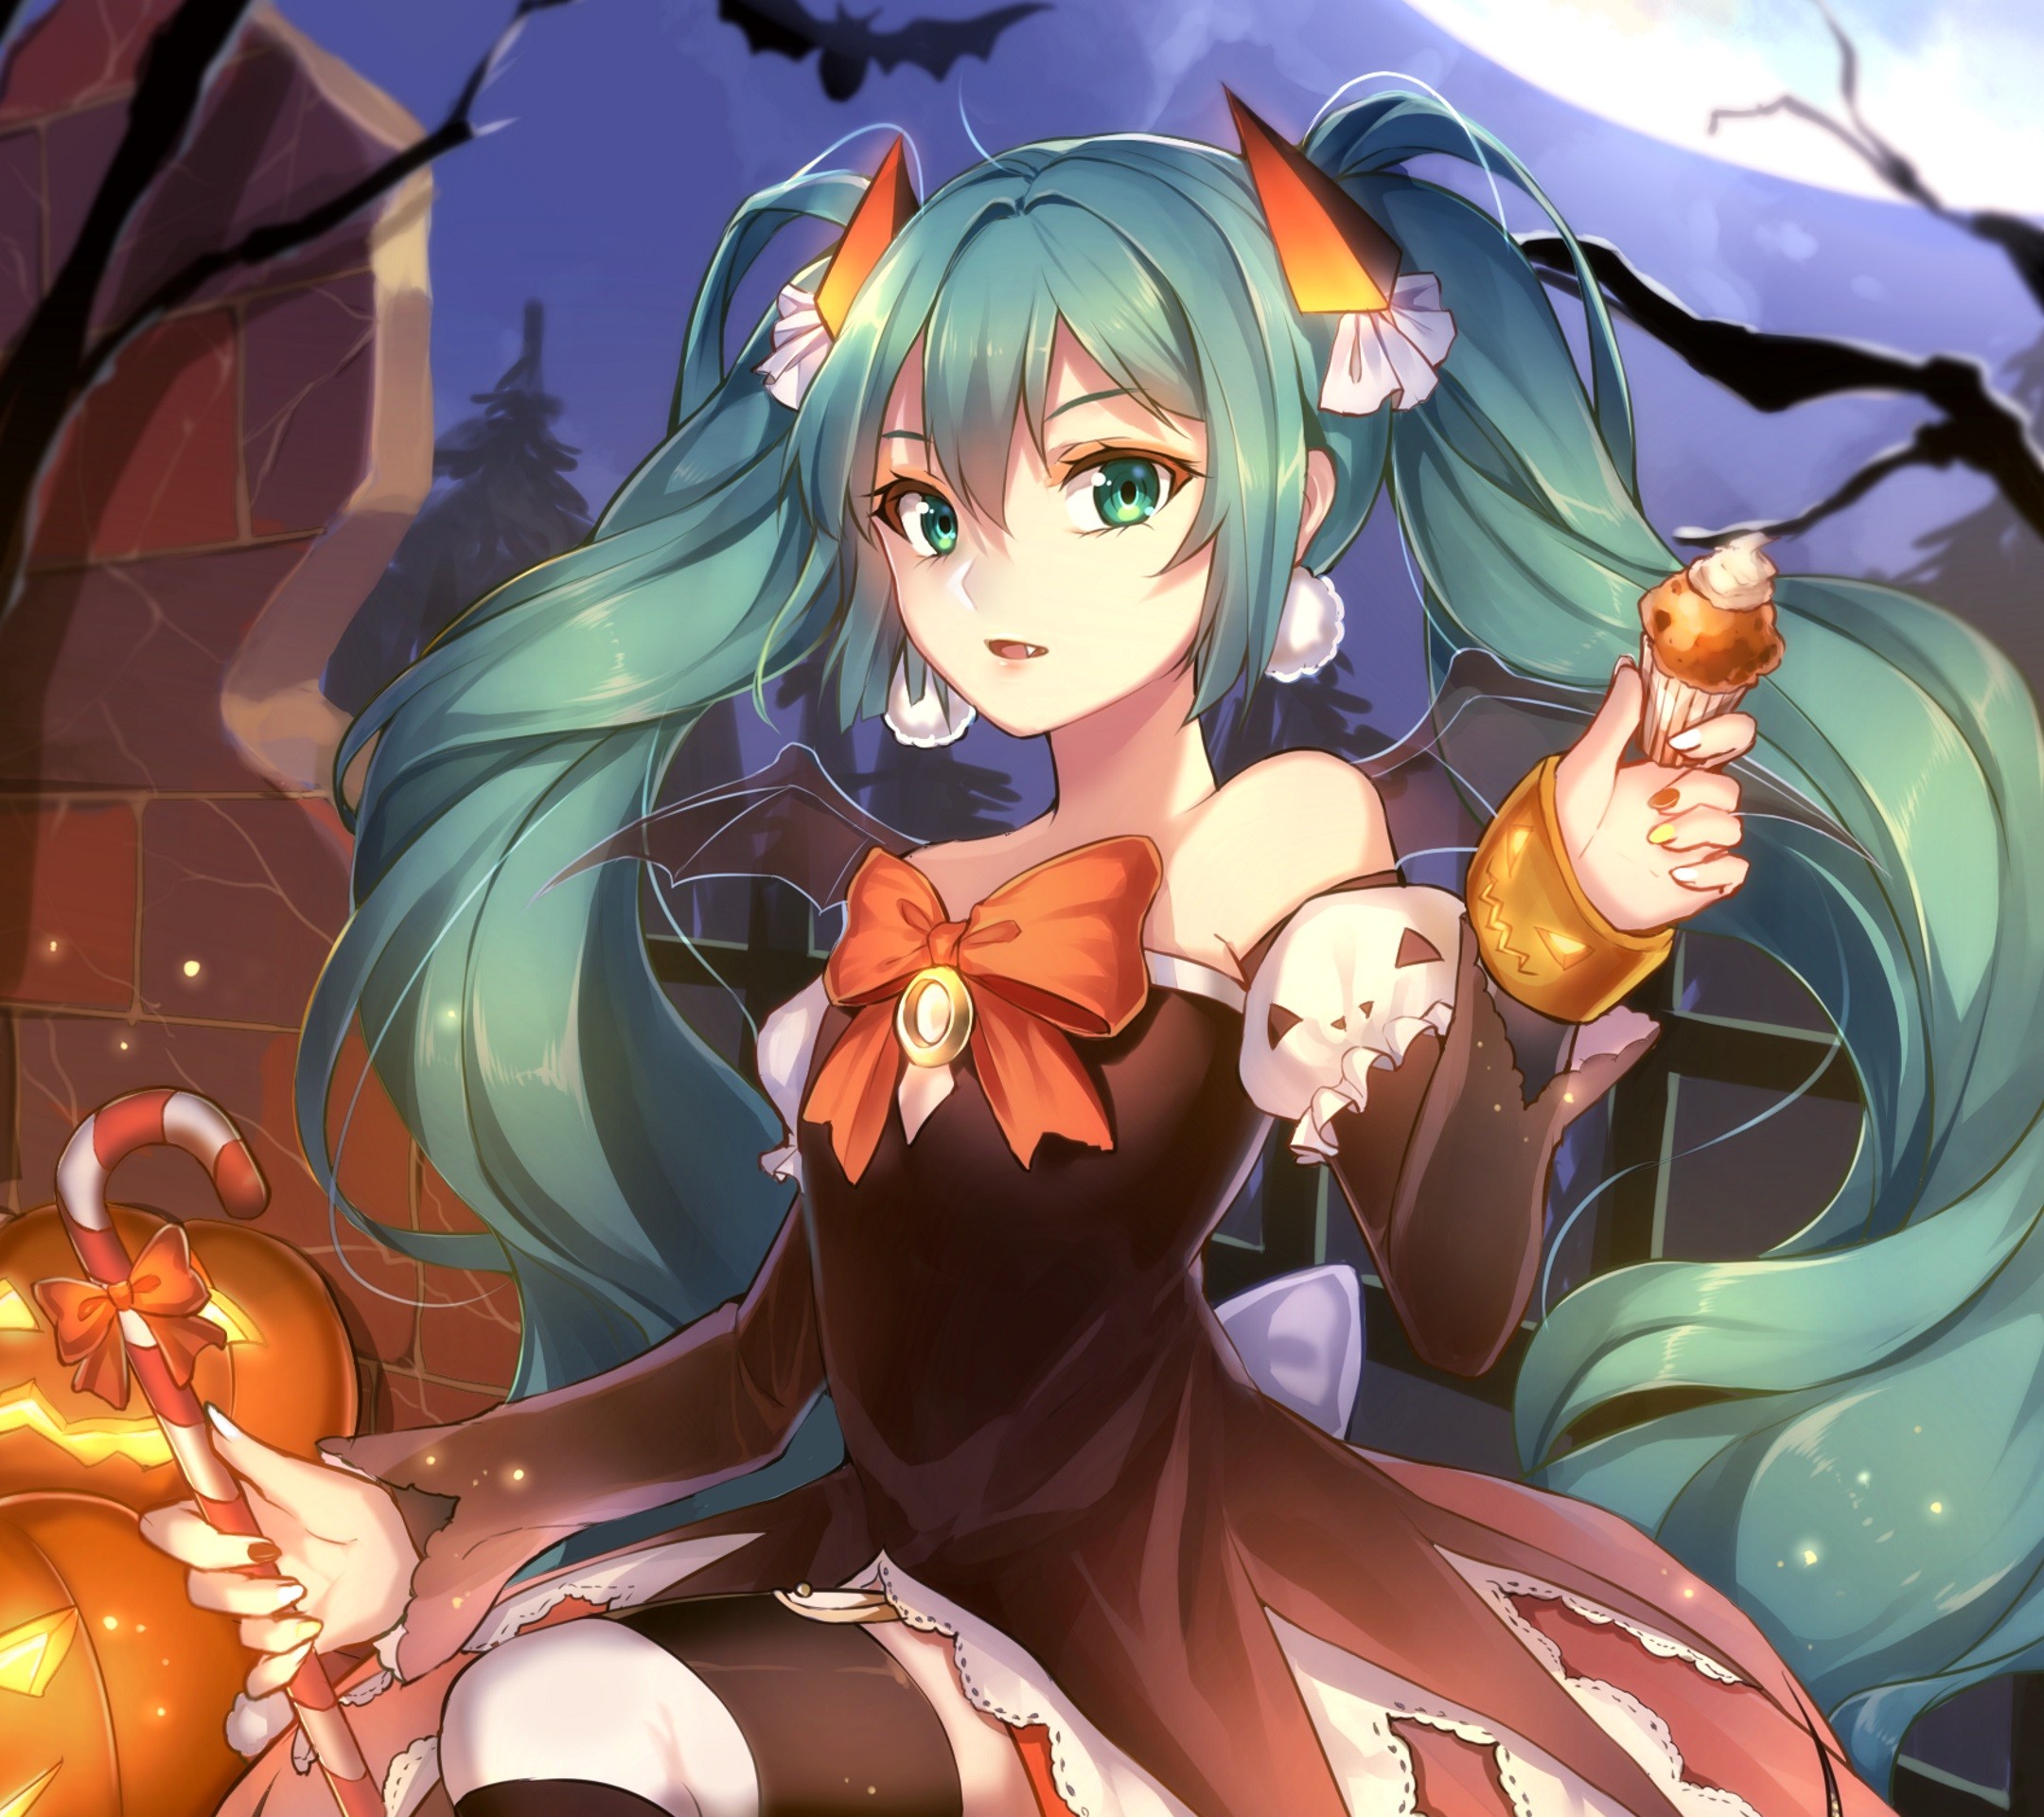 Anime Fans Celebrate Halloween With Epic Art - Anime Herald